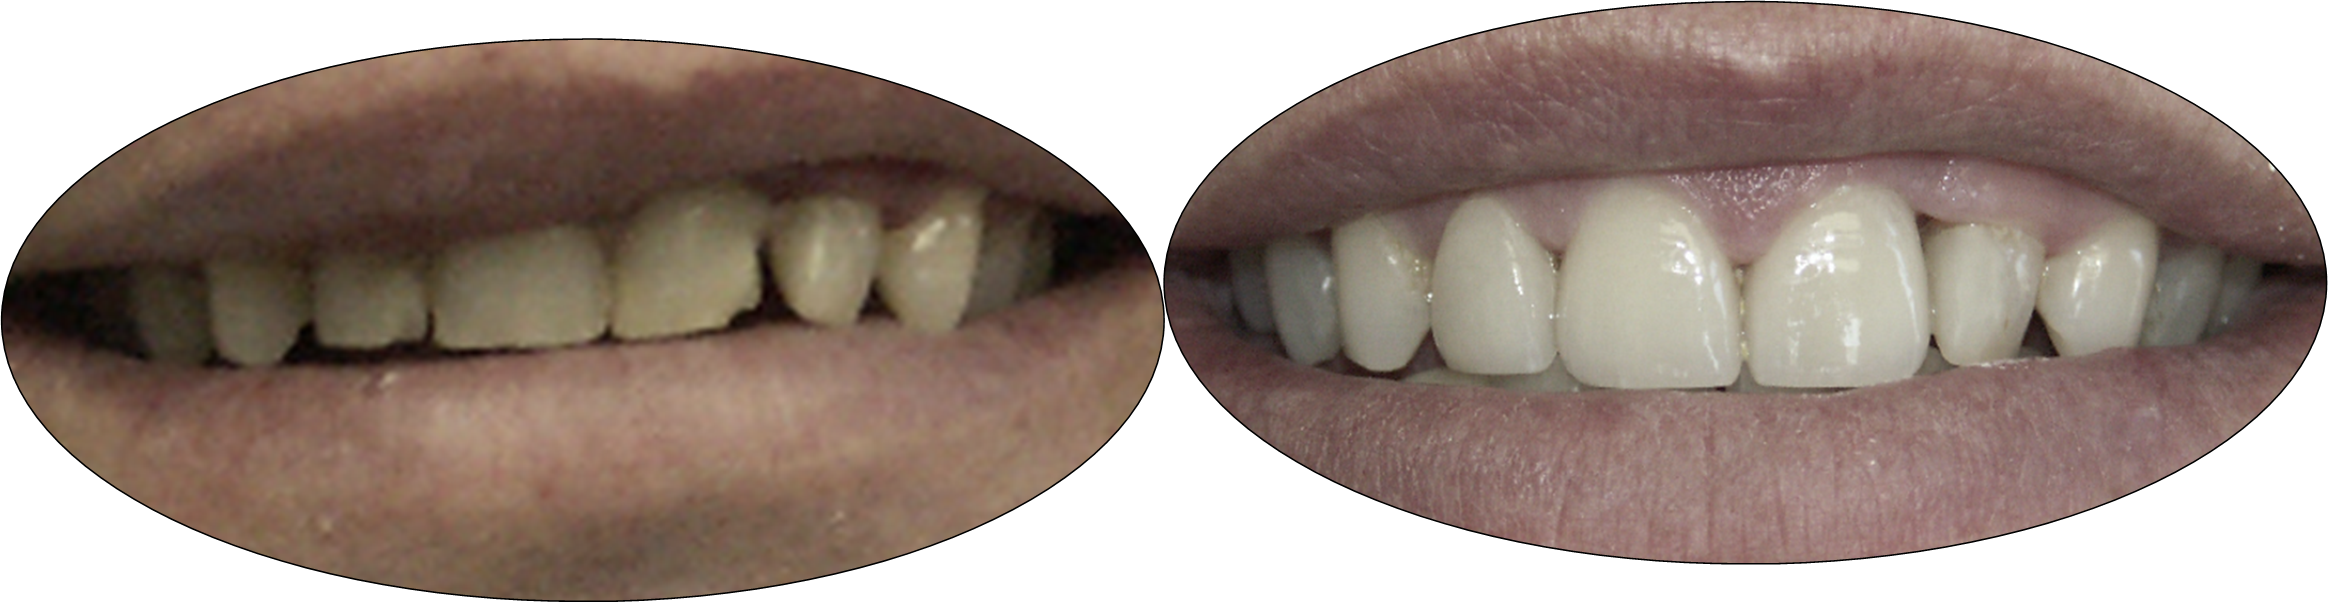 Patient smile gallery photos, before and after porcelain crowns